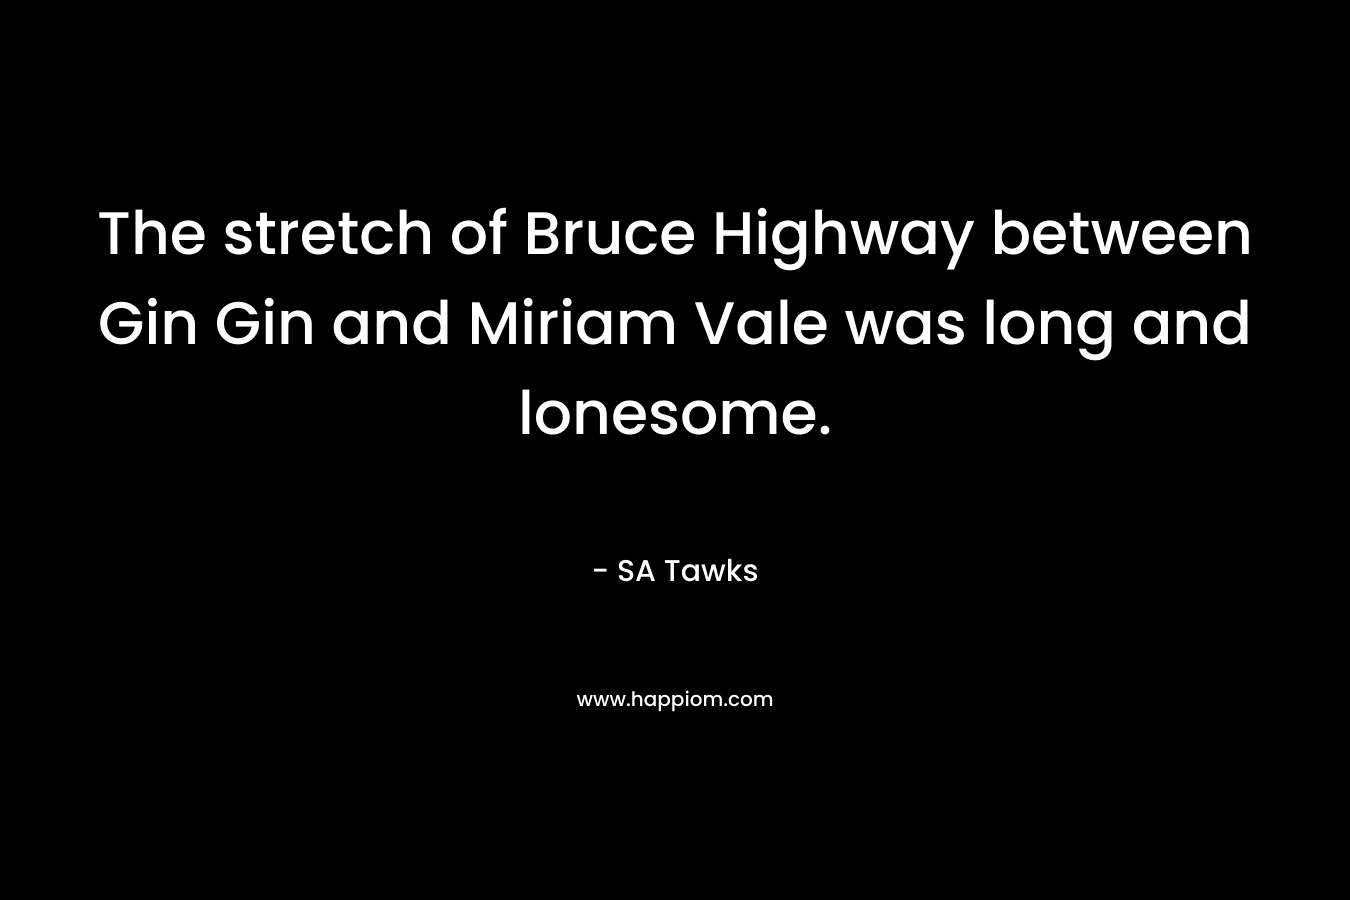 The stretch of Bruce Highway between Gin Gin and Miriam Vale was long and lonesome.